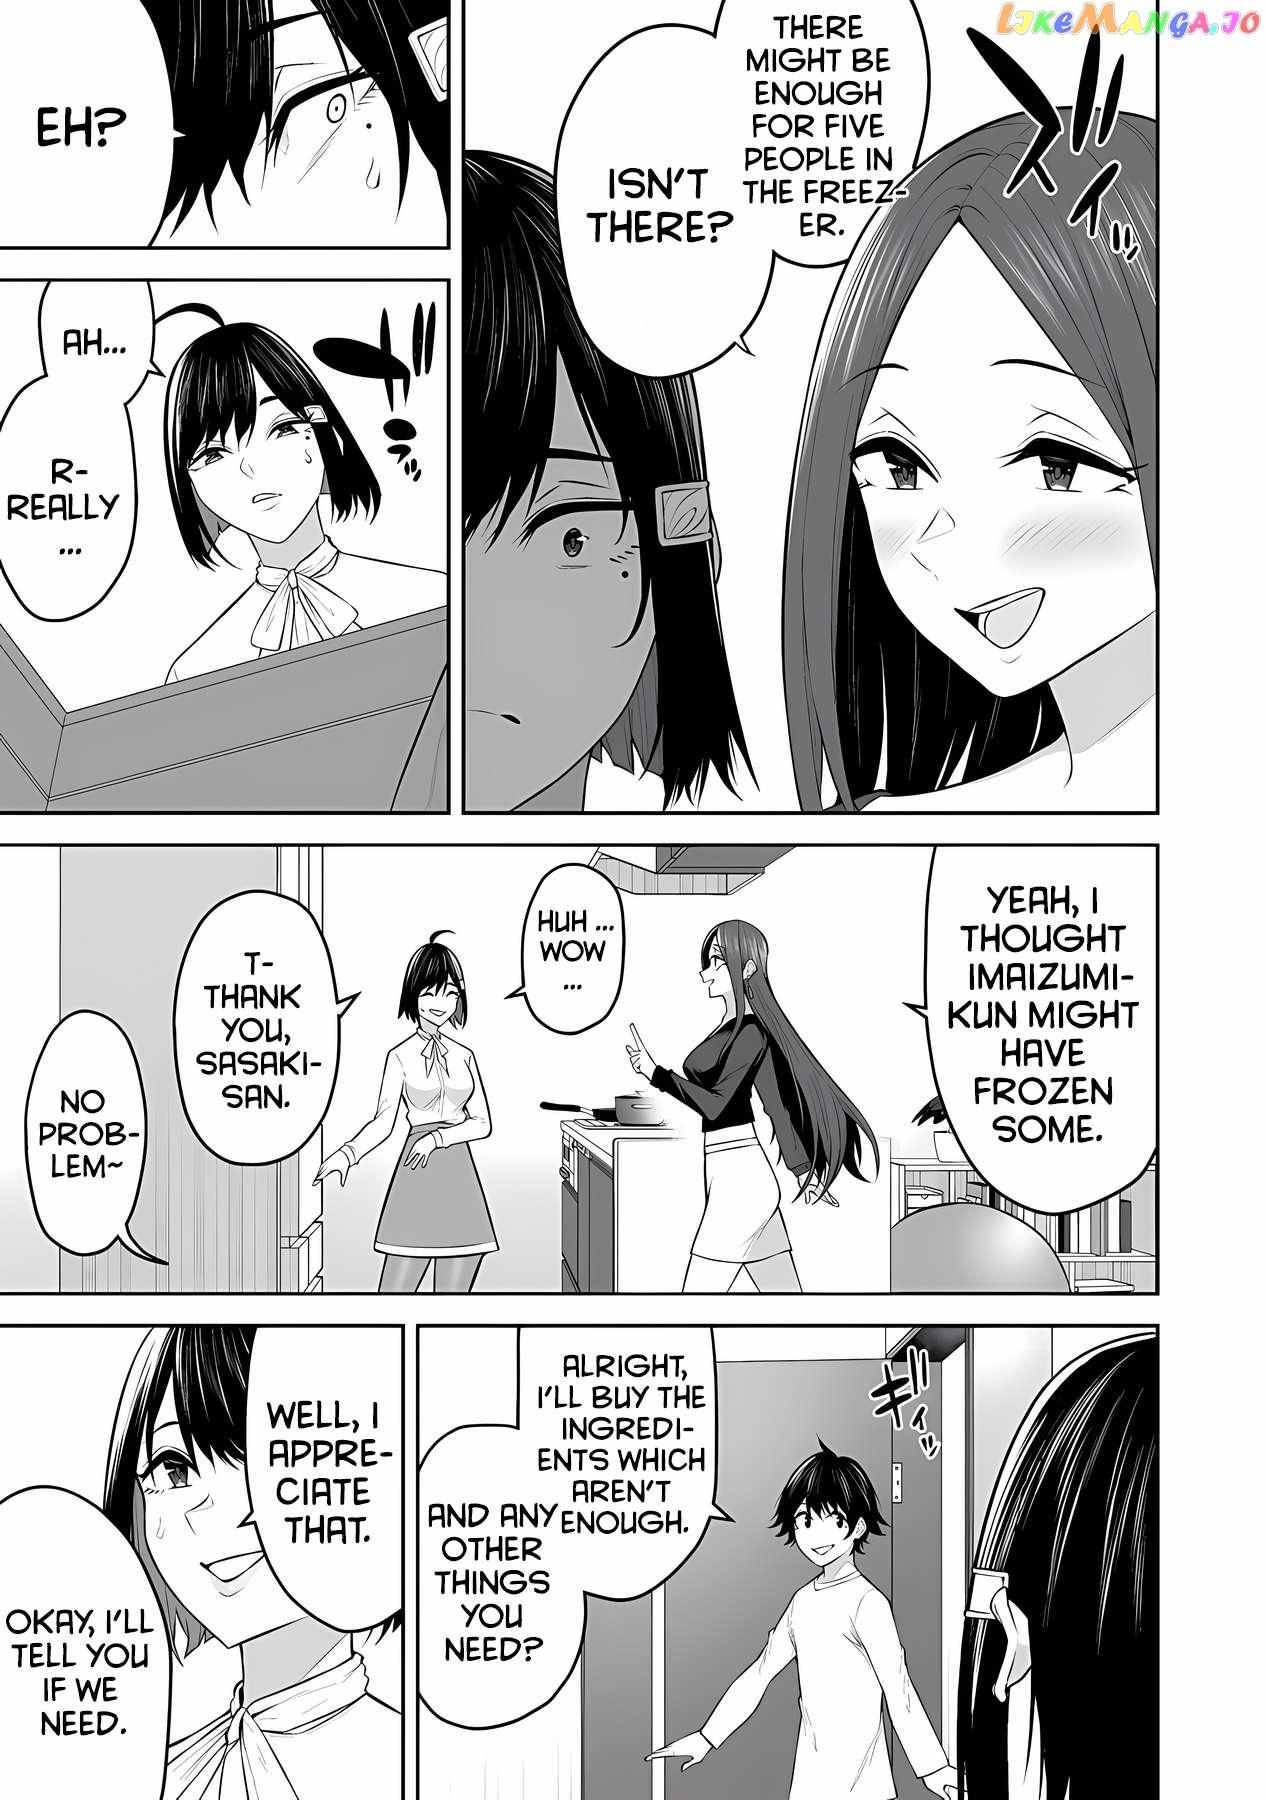 Imaizumin's House Is A Place For Gals To Gather - 21 page 21-230dd496